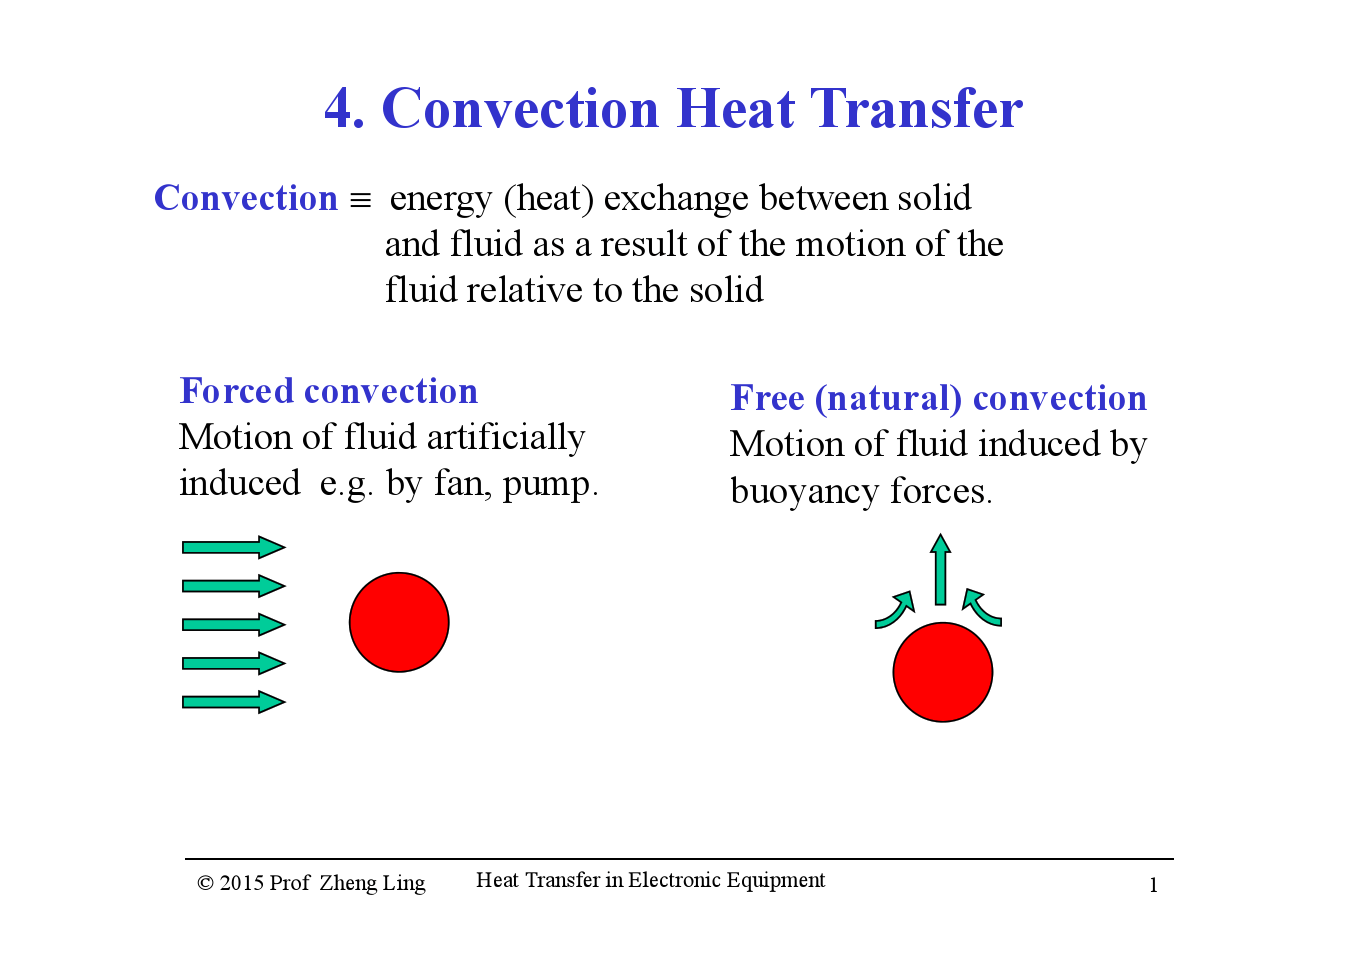 Industrial Heat Transfer-4-Convection